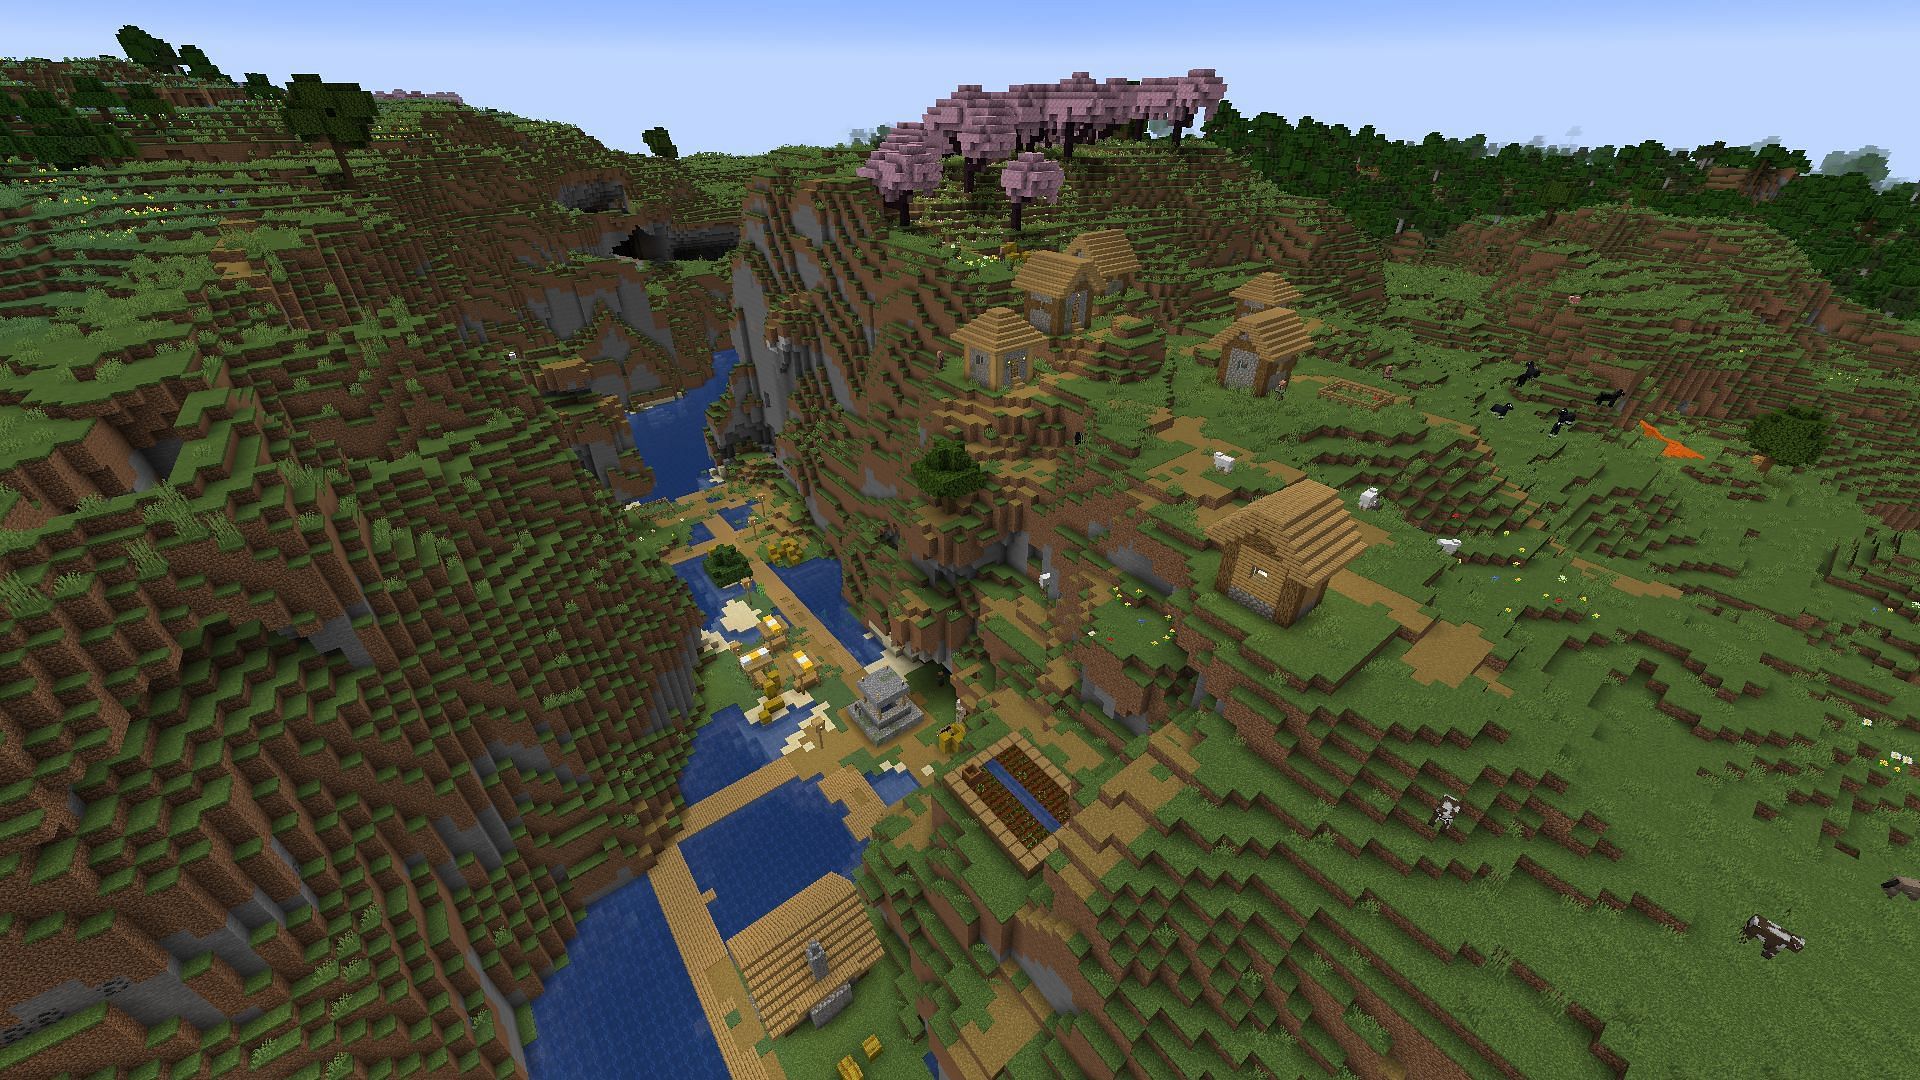 Minecraft players can explore this seed to find villages, outposts, and ancient cities (Image via Mojang Studios)